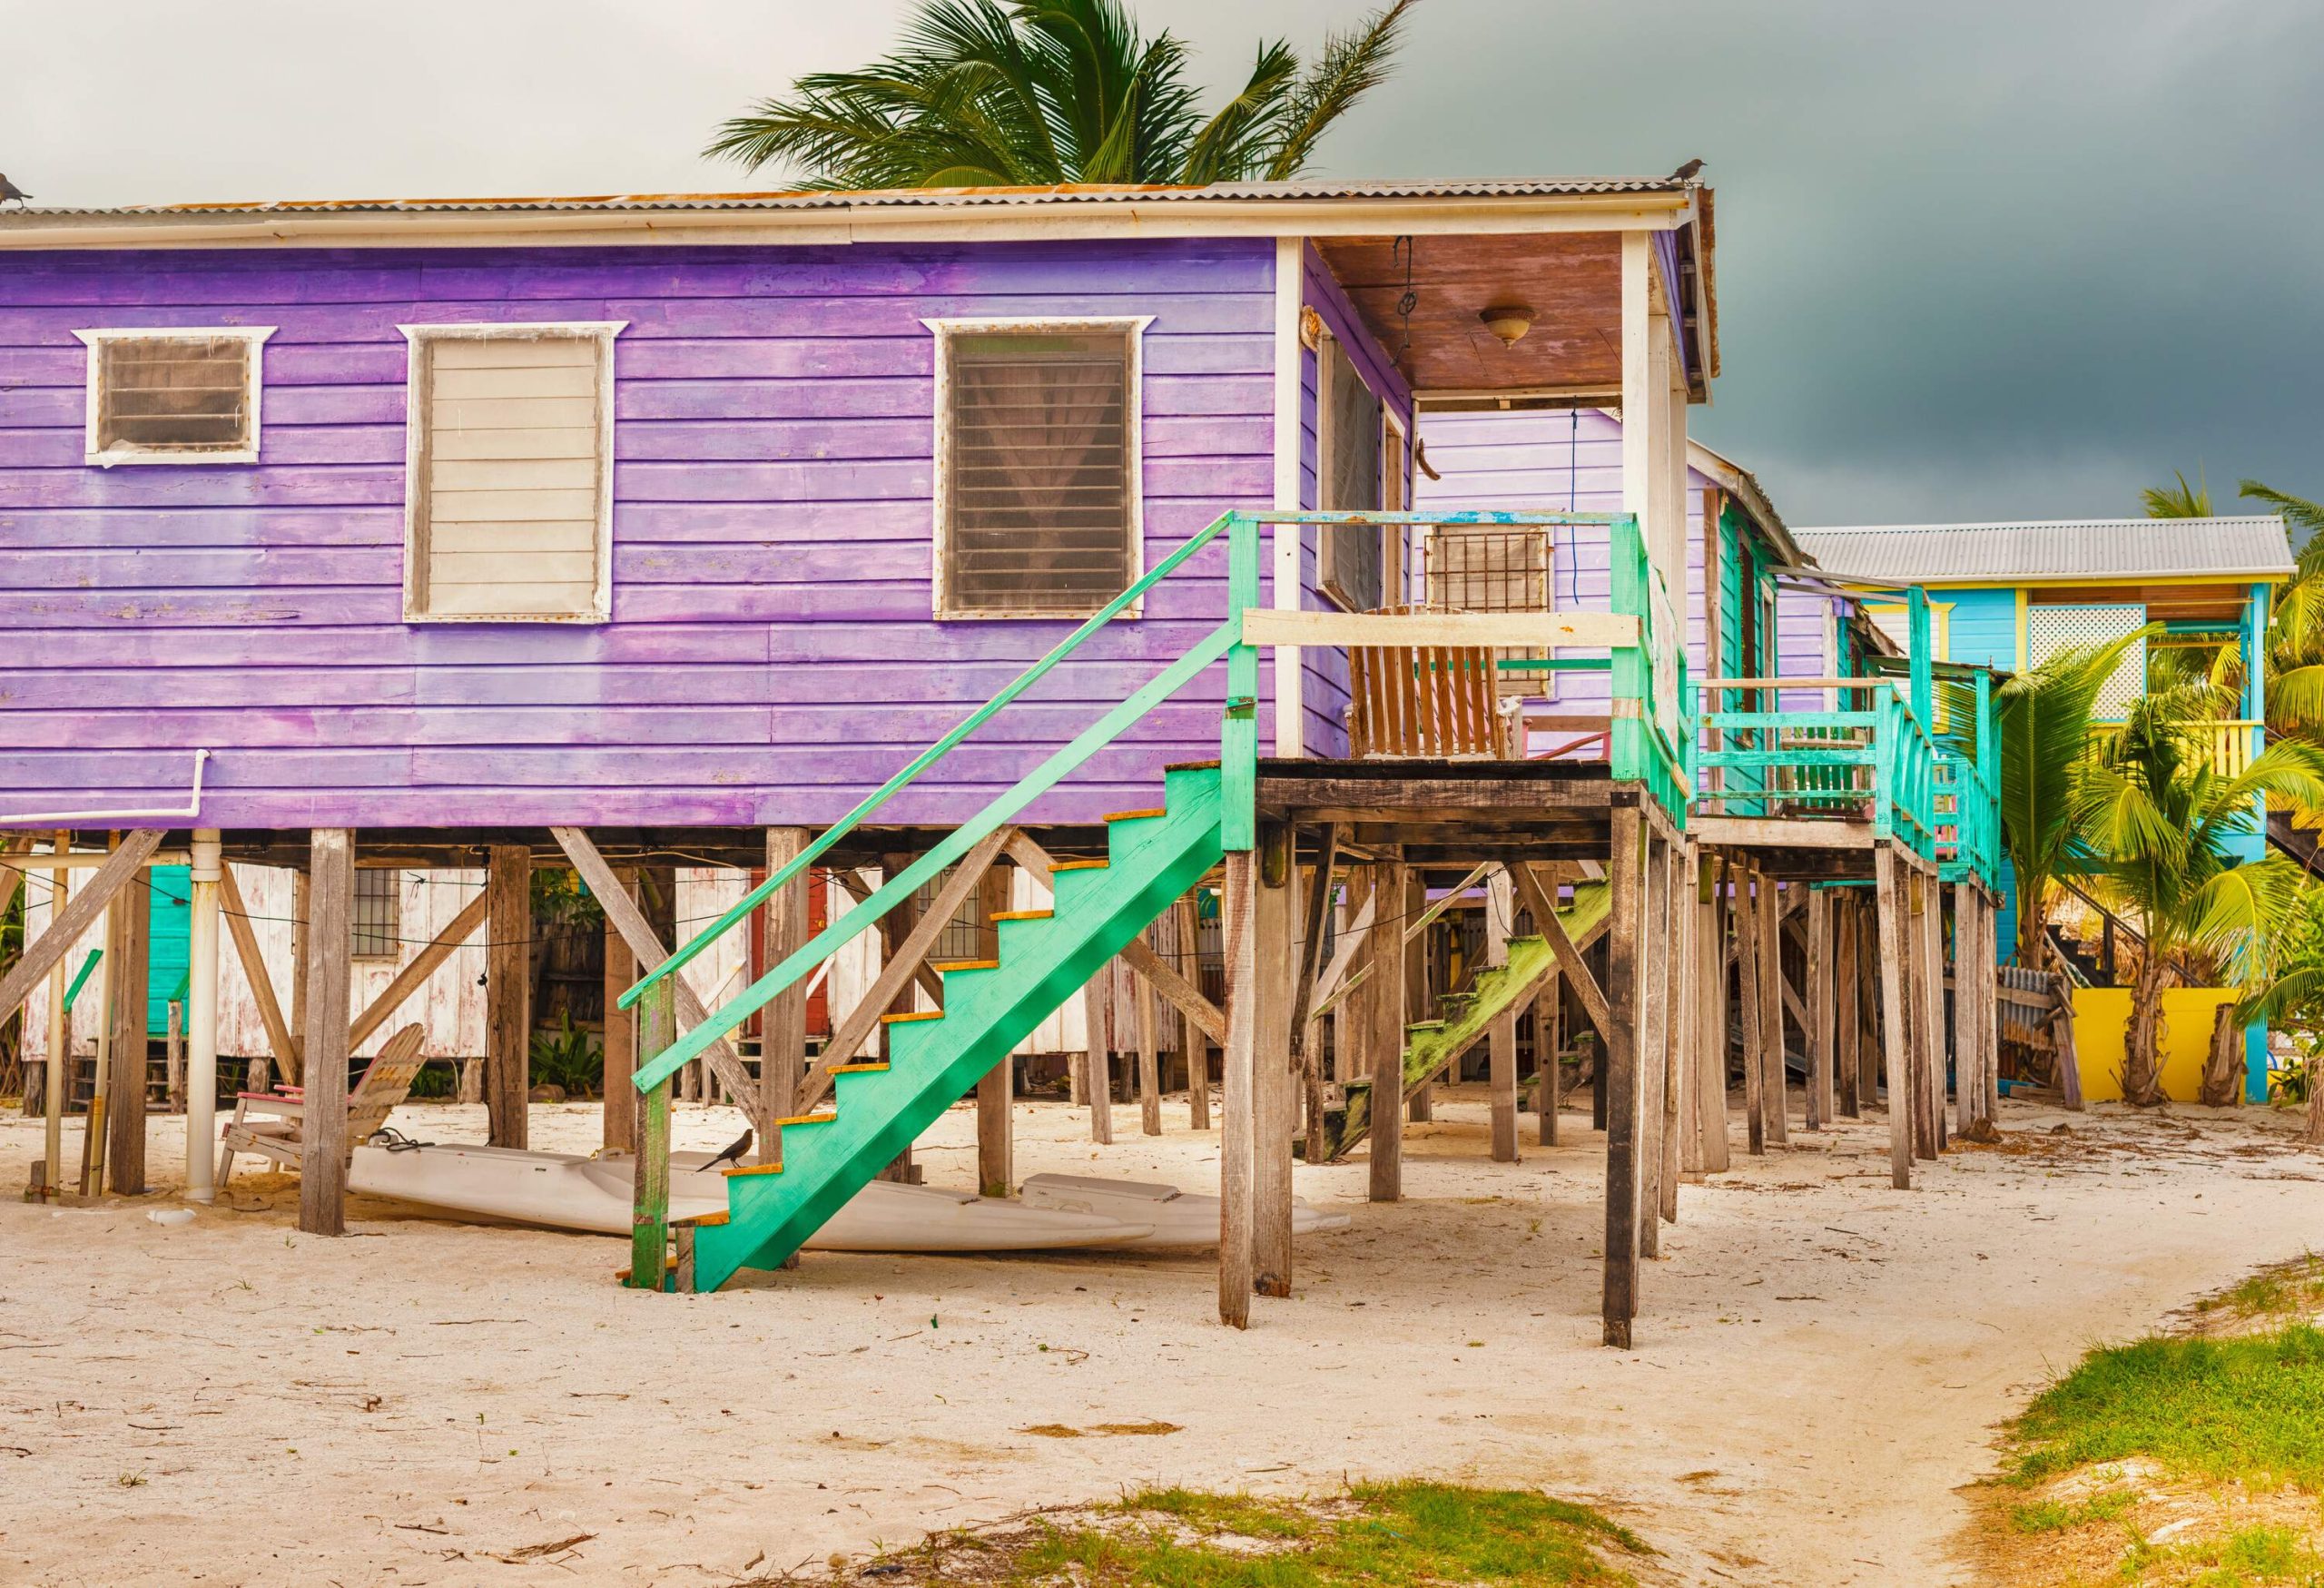 Colourful wooden houses raised on stilts over the sandy ground.